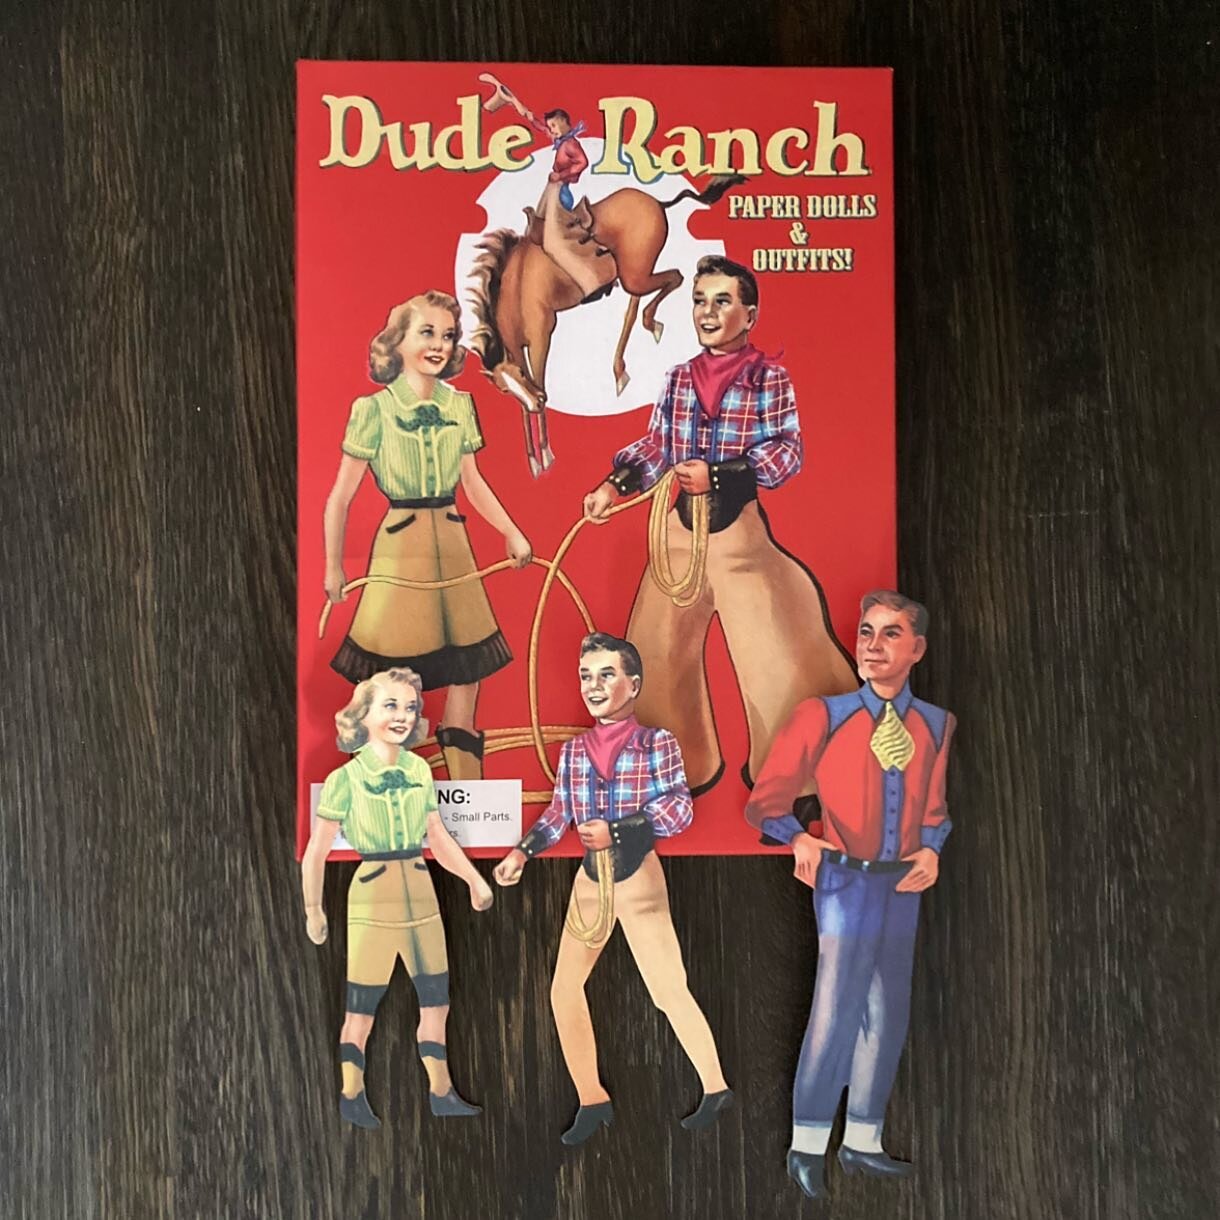 A few days ago we came across this retro Dude Ranch Paper Dolls &amp; Outfits box in a store in Los Angeles. 
Can't help but think of @lynn.downey.historian , dude ranch expert, who co-authored the article &quot;Dude Ranch Duds, A Brief History of Du